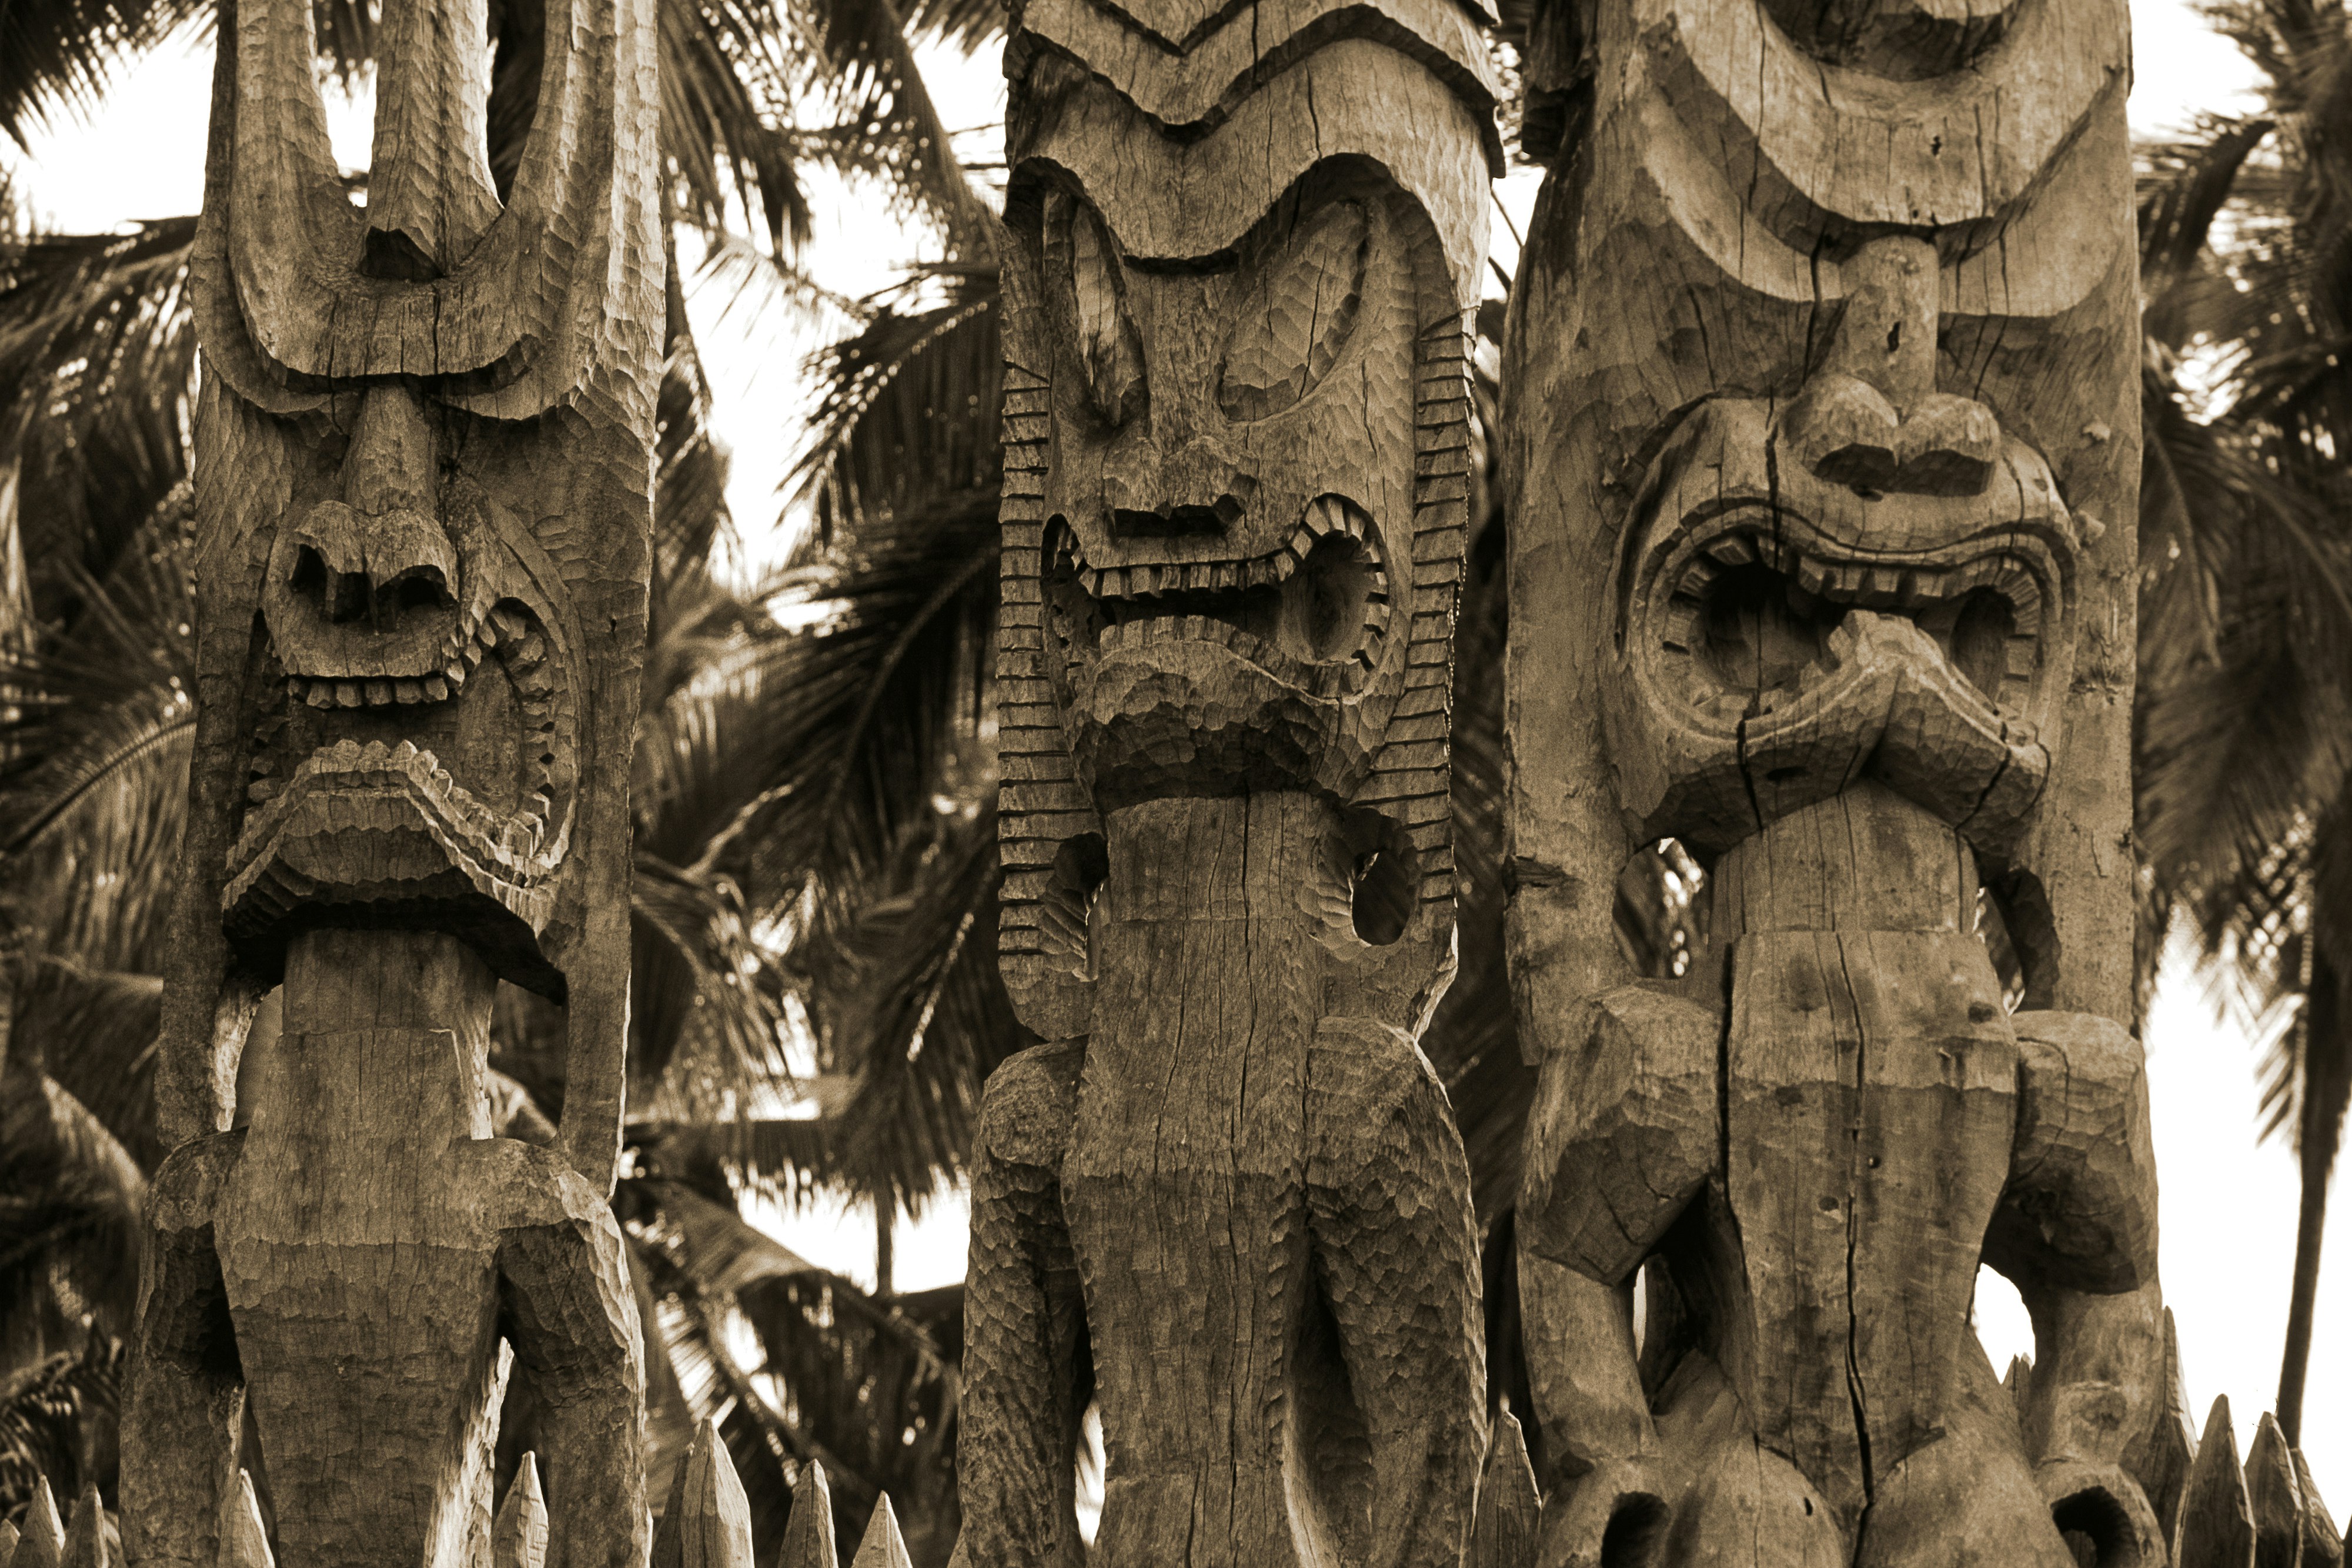 The wooden idols of ancient Hawaiians bare their teeth for the camera